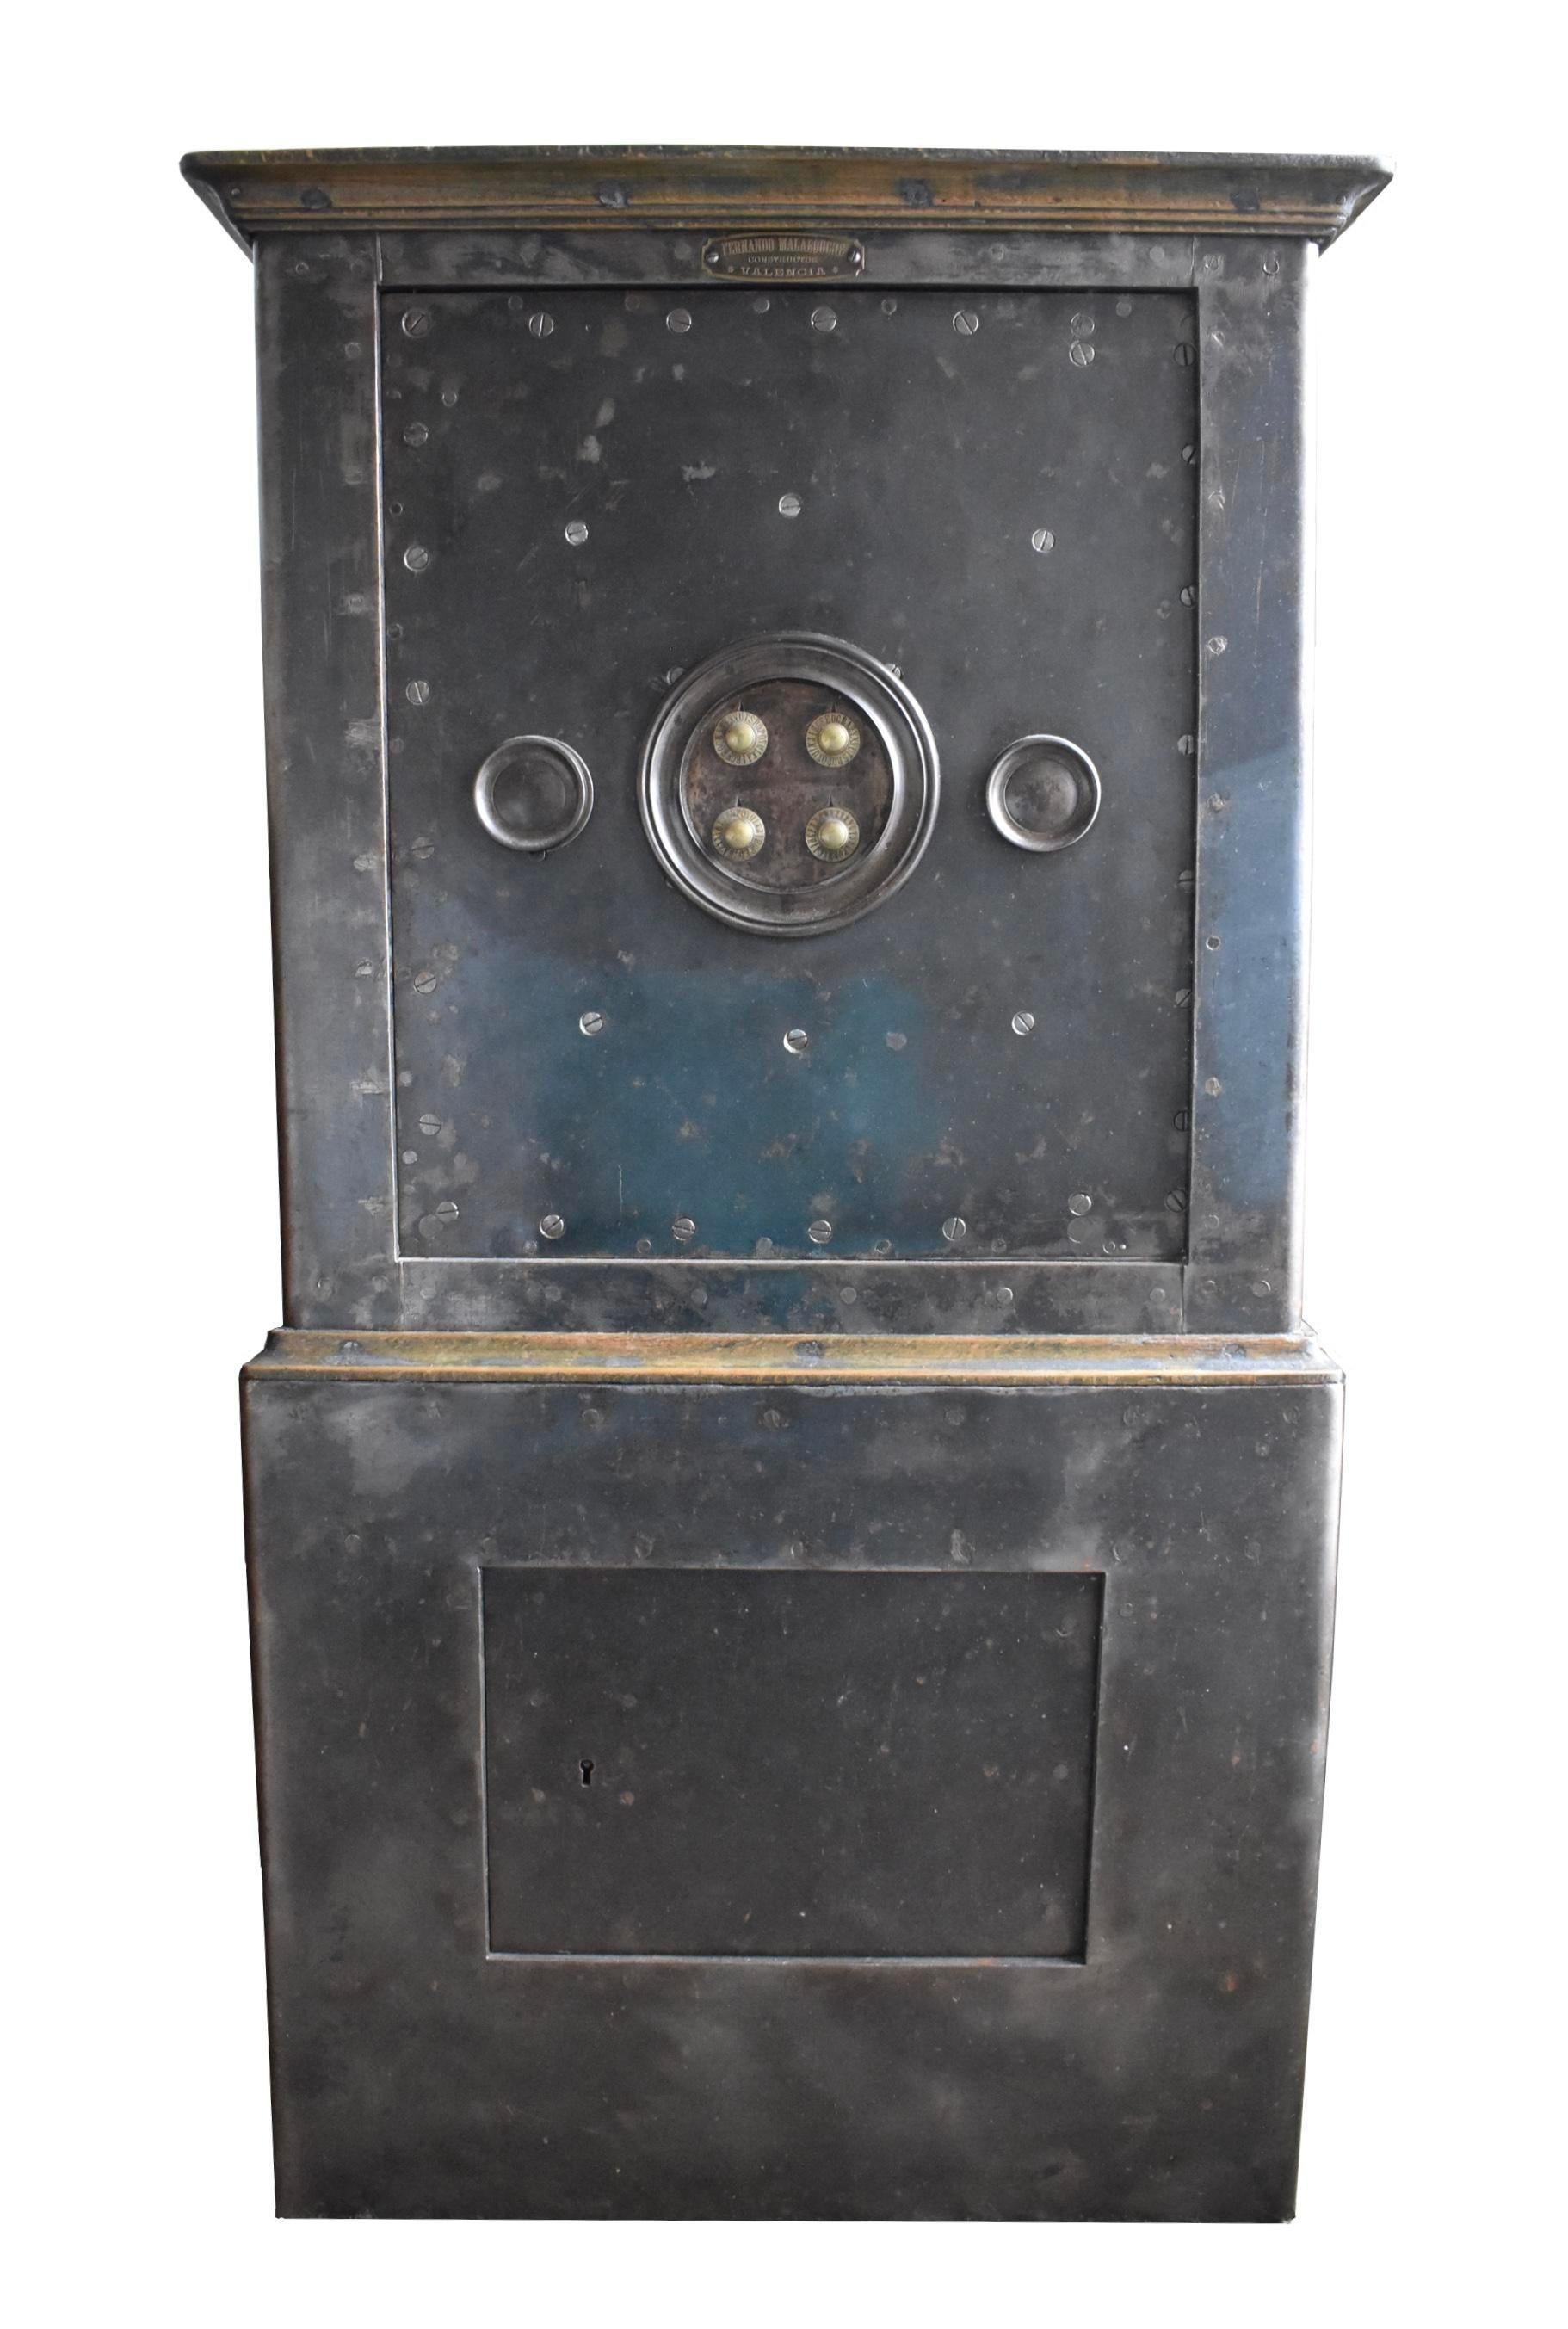 Gorgeous Spanish iron safe from the early 1800s. As shown in the pictures, the safe was built in Valencia and has a still fully functional lock. A new key was made to work the lock. The safe is composed of two compartment: the top one is the locked